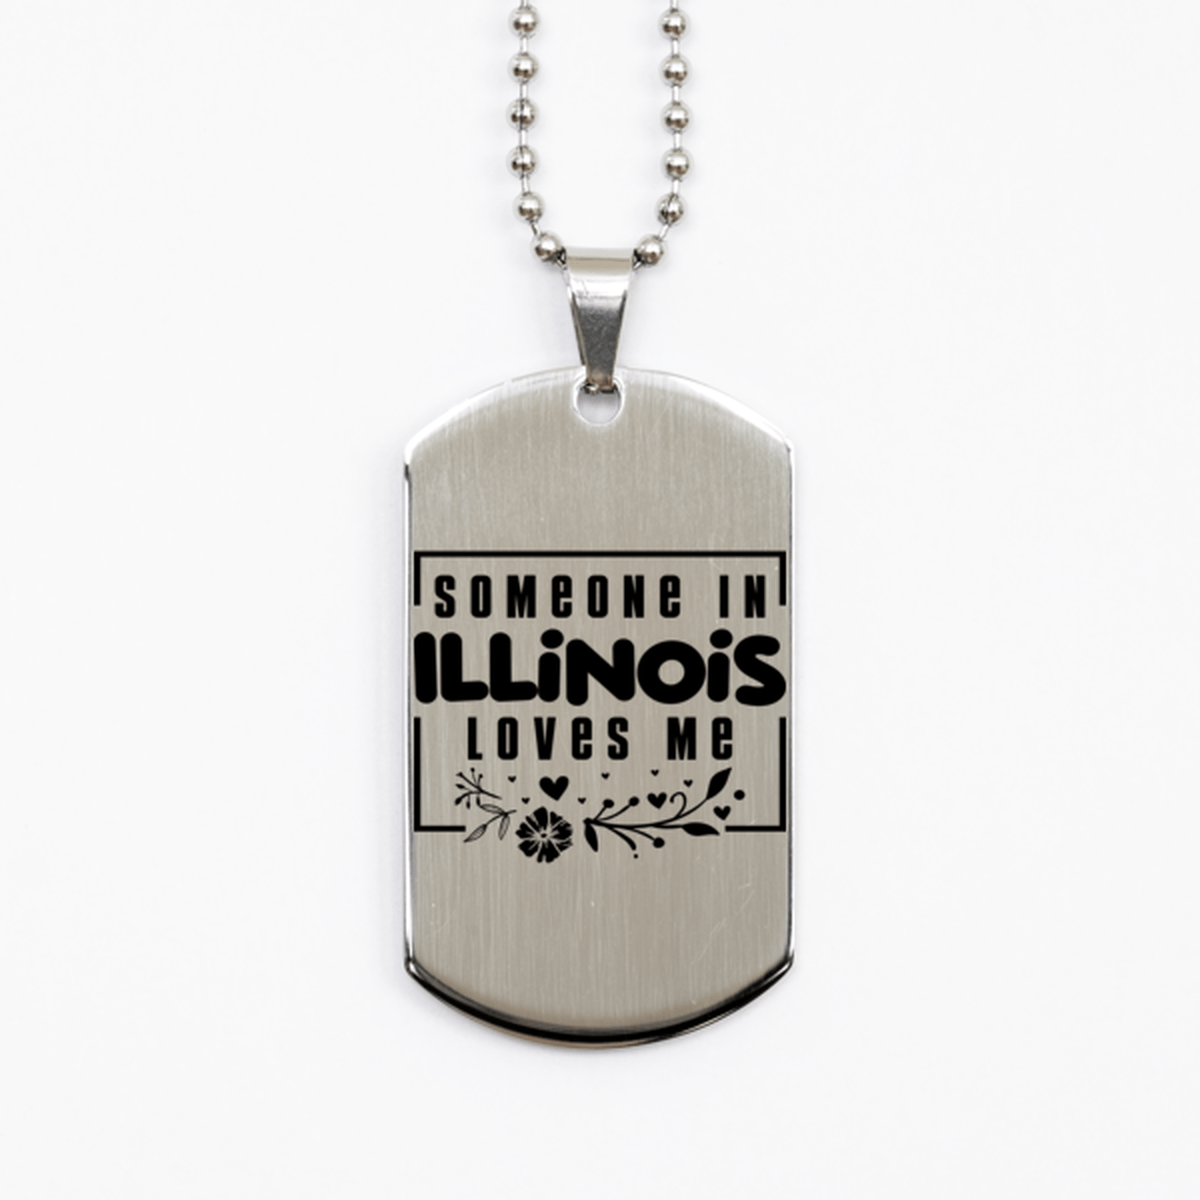 Cute Illinois Silver Dog Tag Necklace, Someone in Illinois Loves Me, Best Birthday Gifts from Illinois Friends & Family